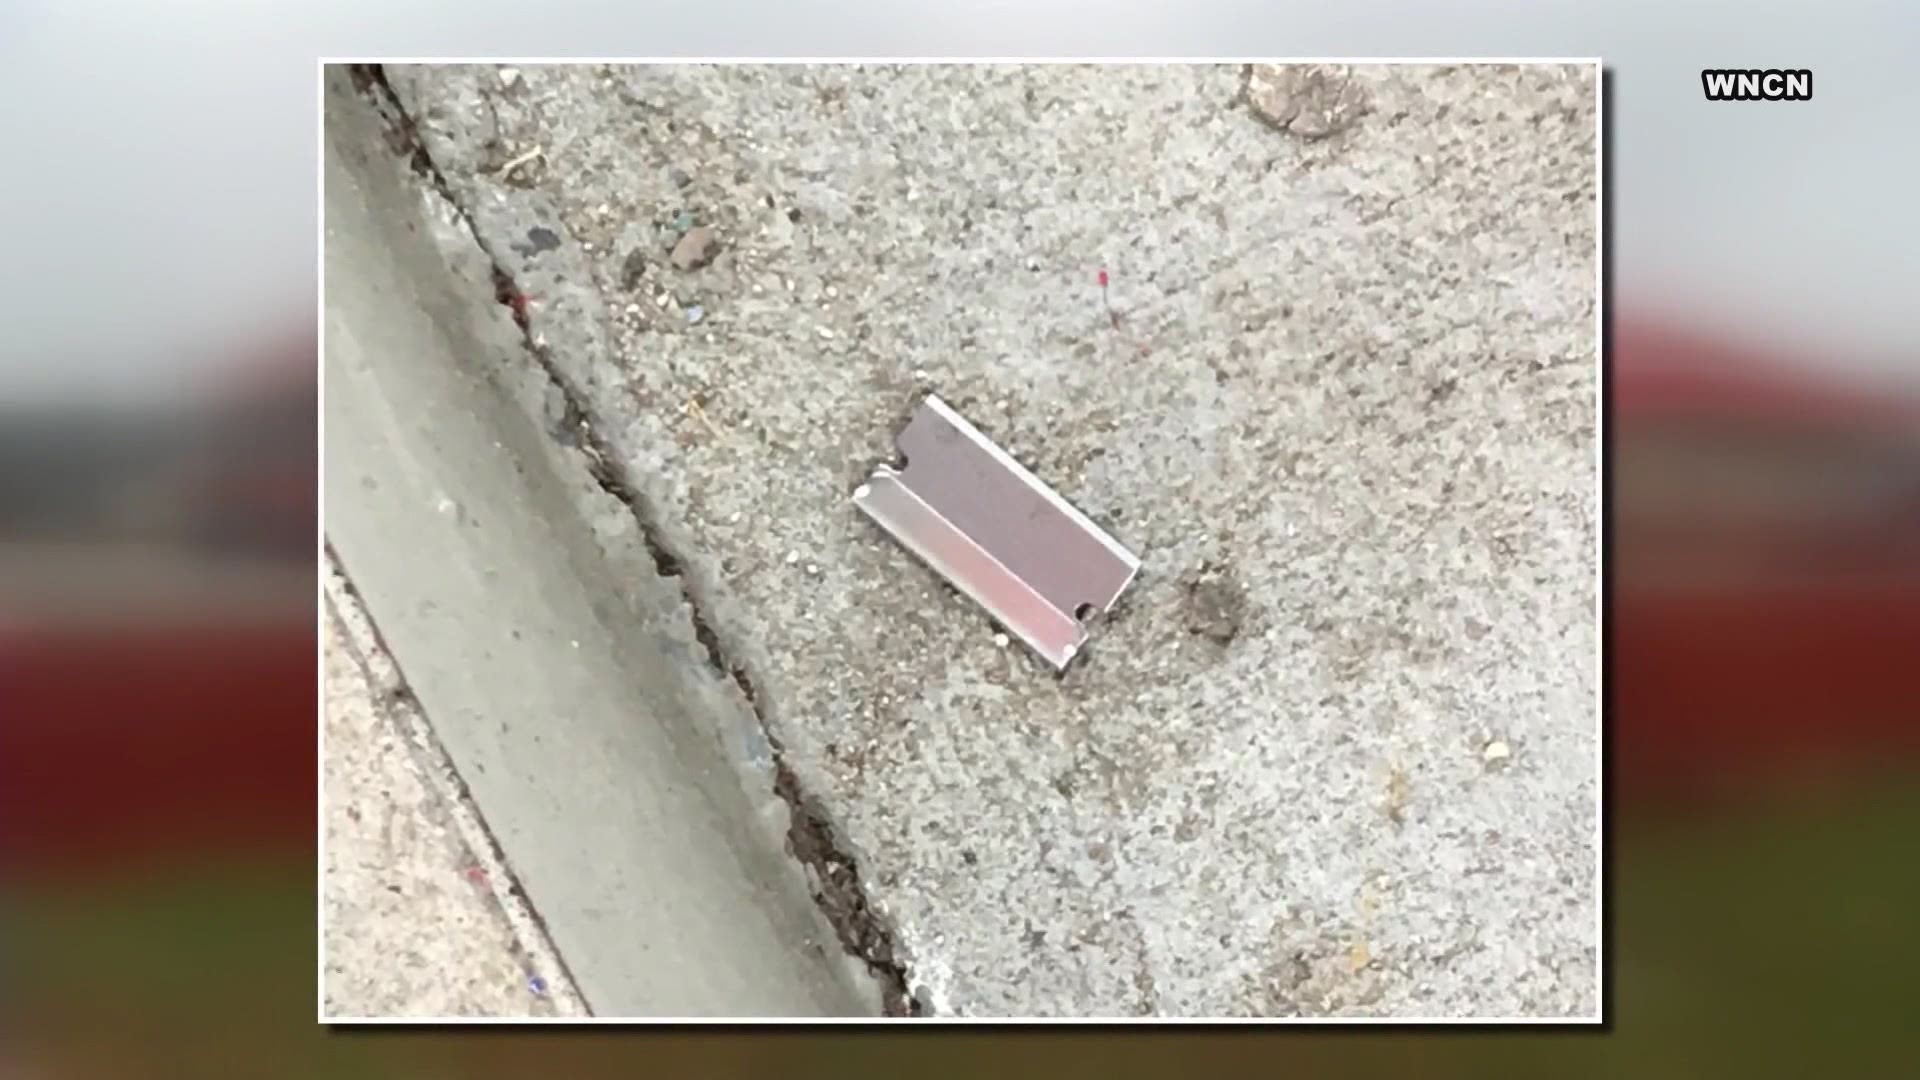 A Siler City man says he found a razor blade in the rubber grip of a gas pump on Friday.